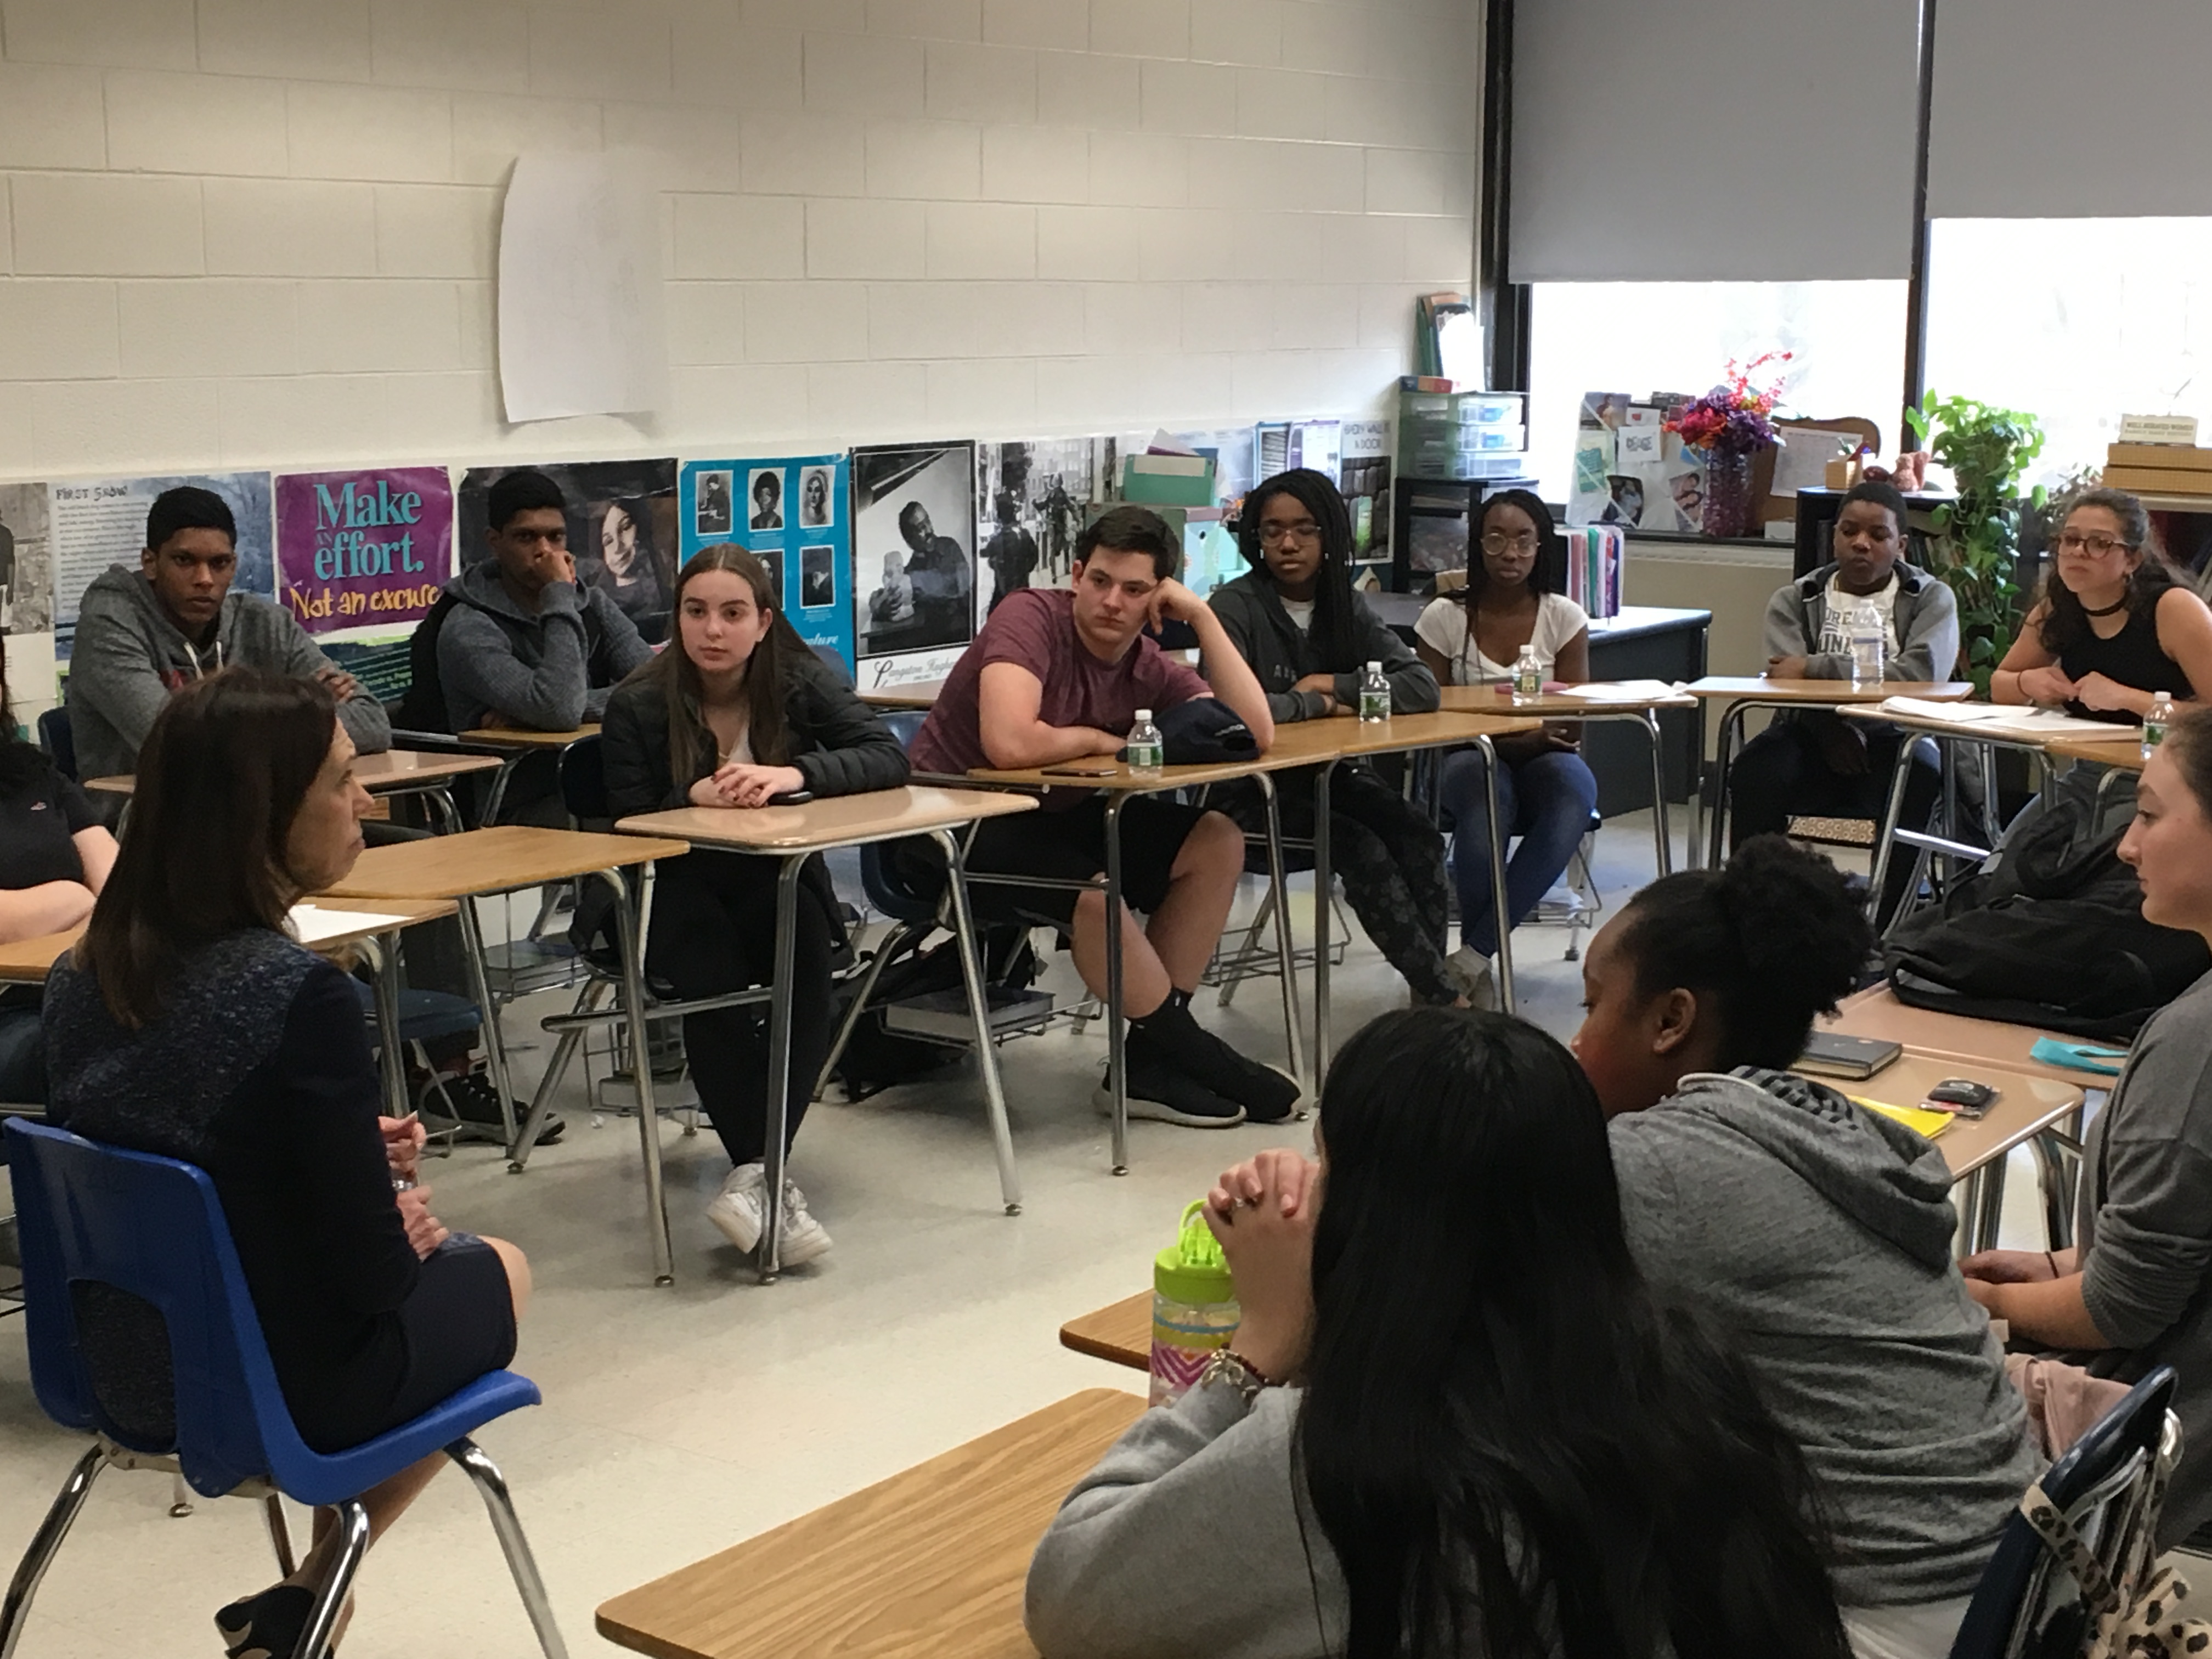 Assemblymember Amy Paulin met with the members of the FEMpowerMENT Club at New Rochelle High School on April 11, 2018 to discuss how she first decided to run for office, the barriers women legislators